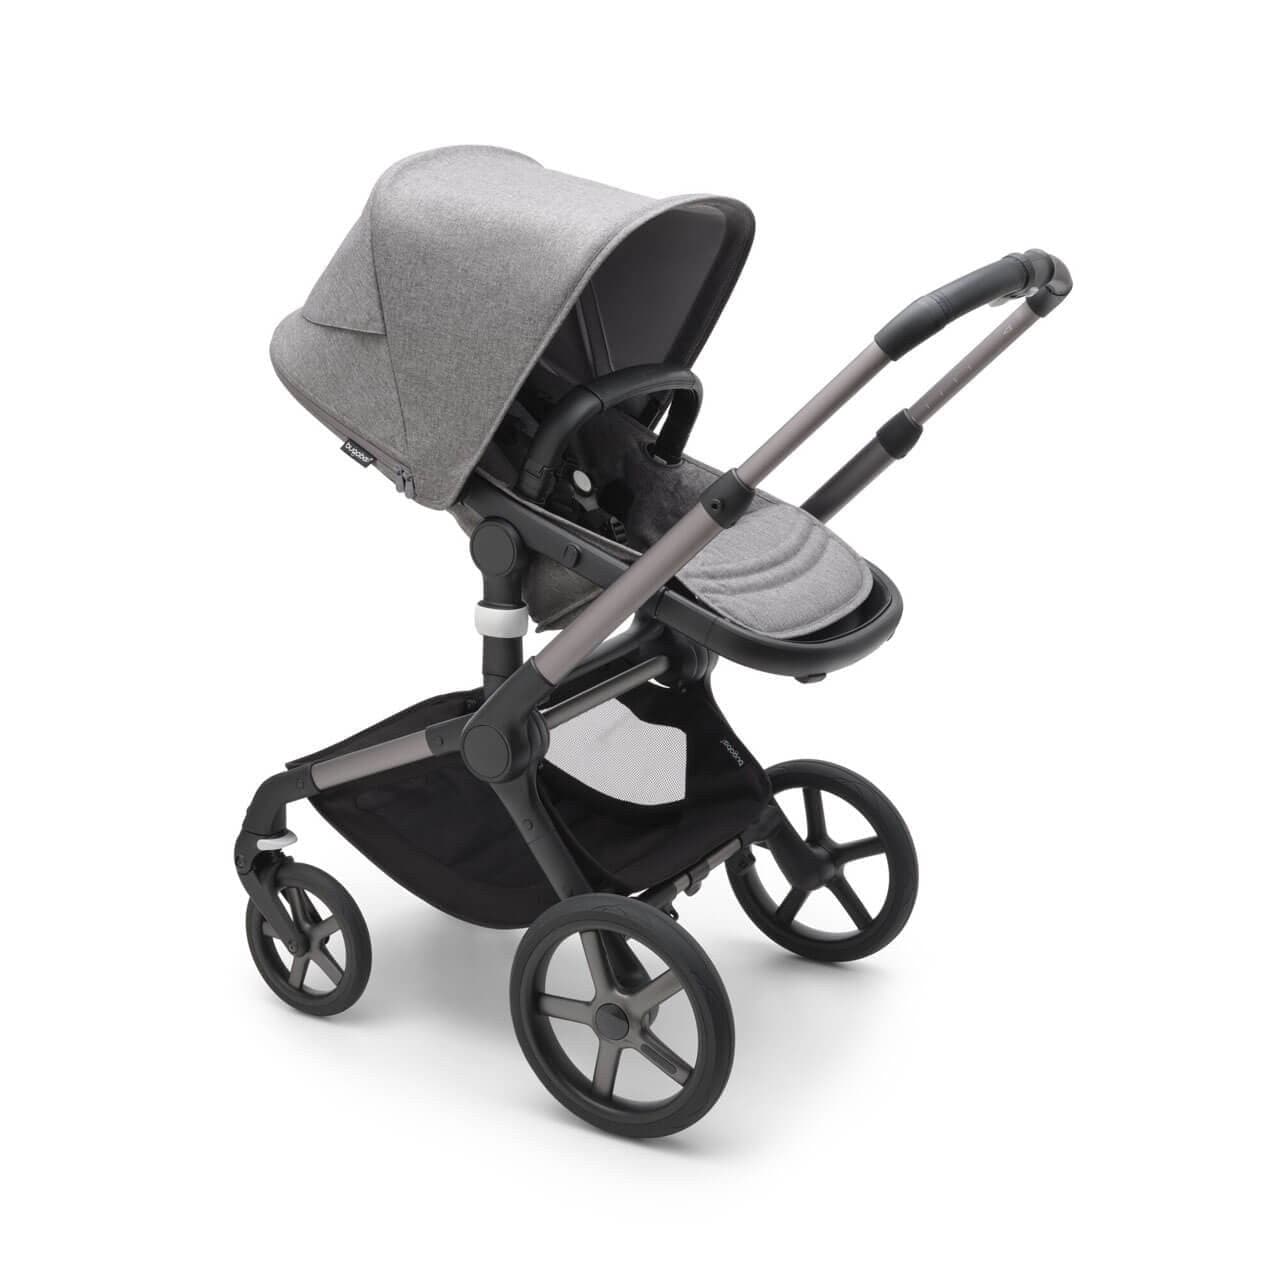 Bugaboo Fox 5 Ultimate Travel System Bundle - Graphite/Grey Melange - For Your Little One